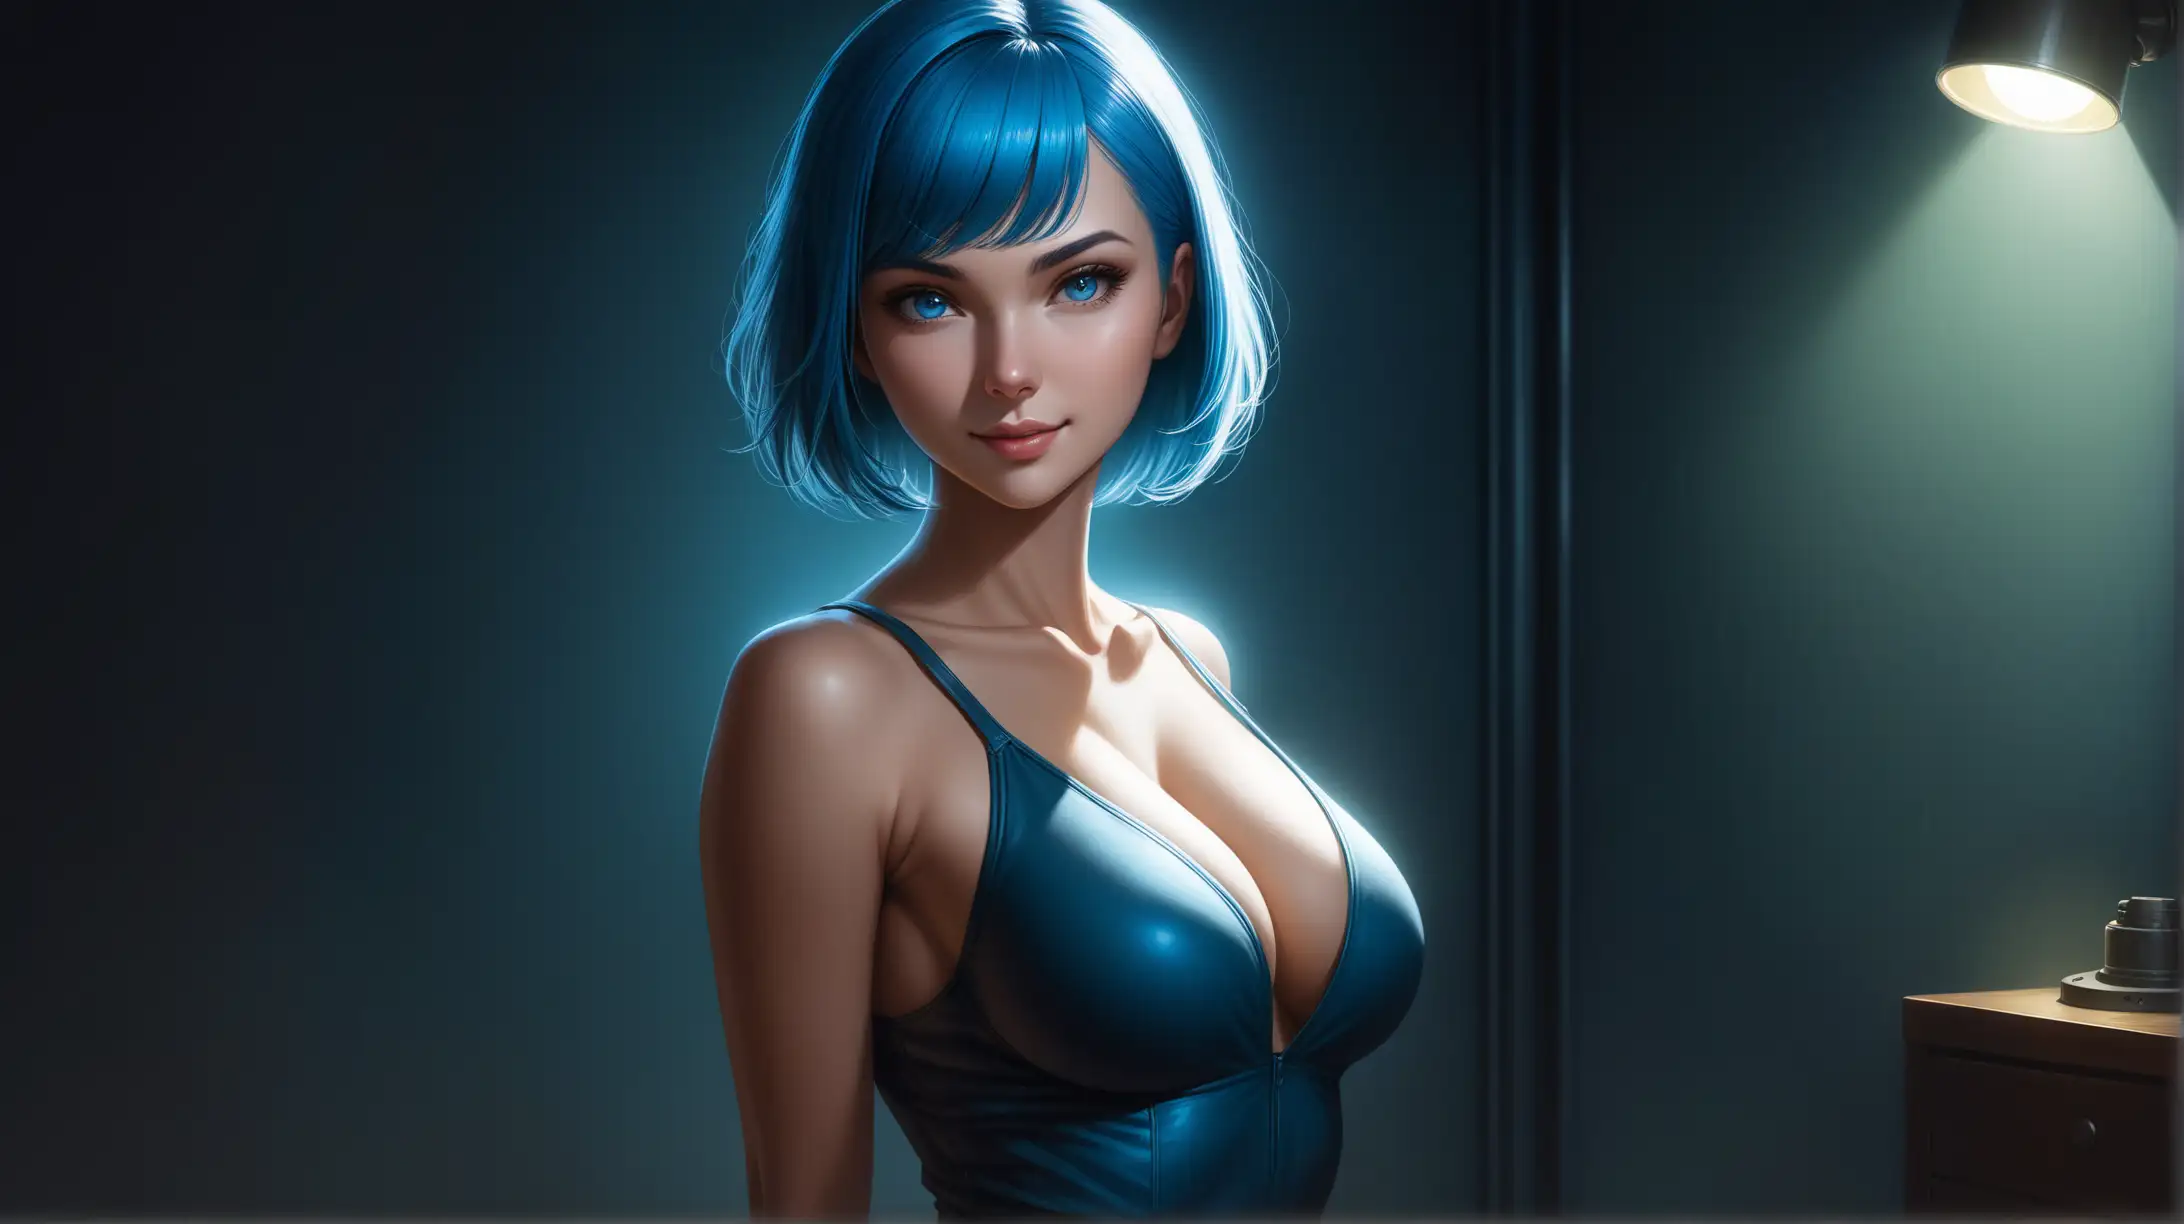 Seductive Woman with Blue Hair in FalloutInspired Outfit at Night